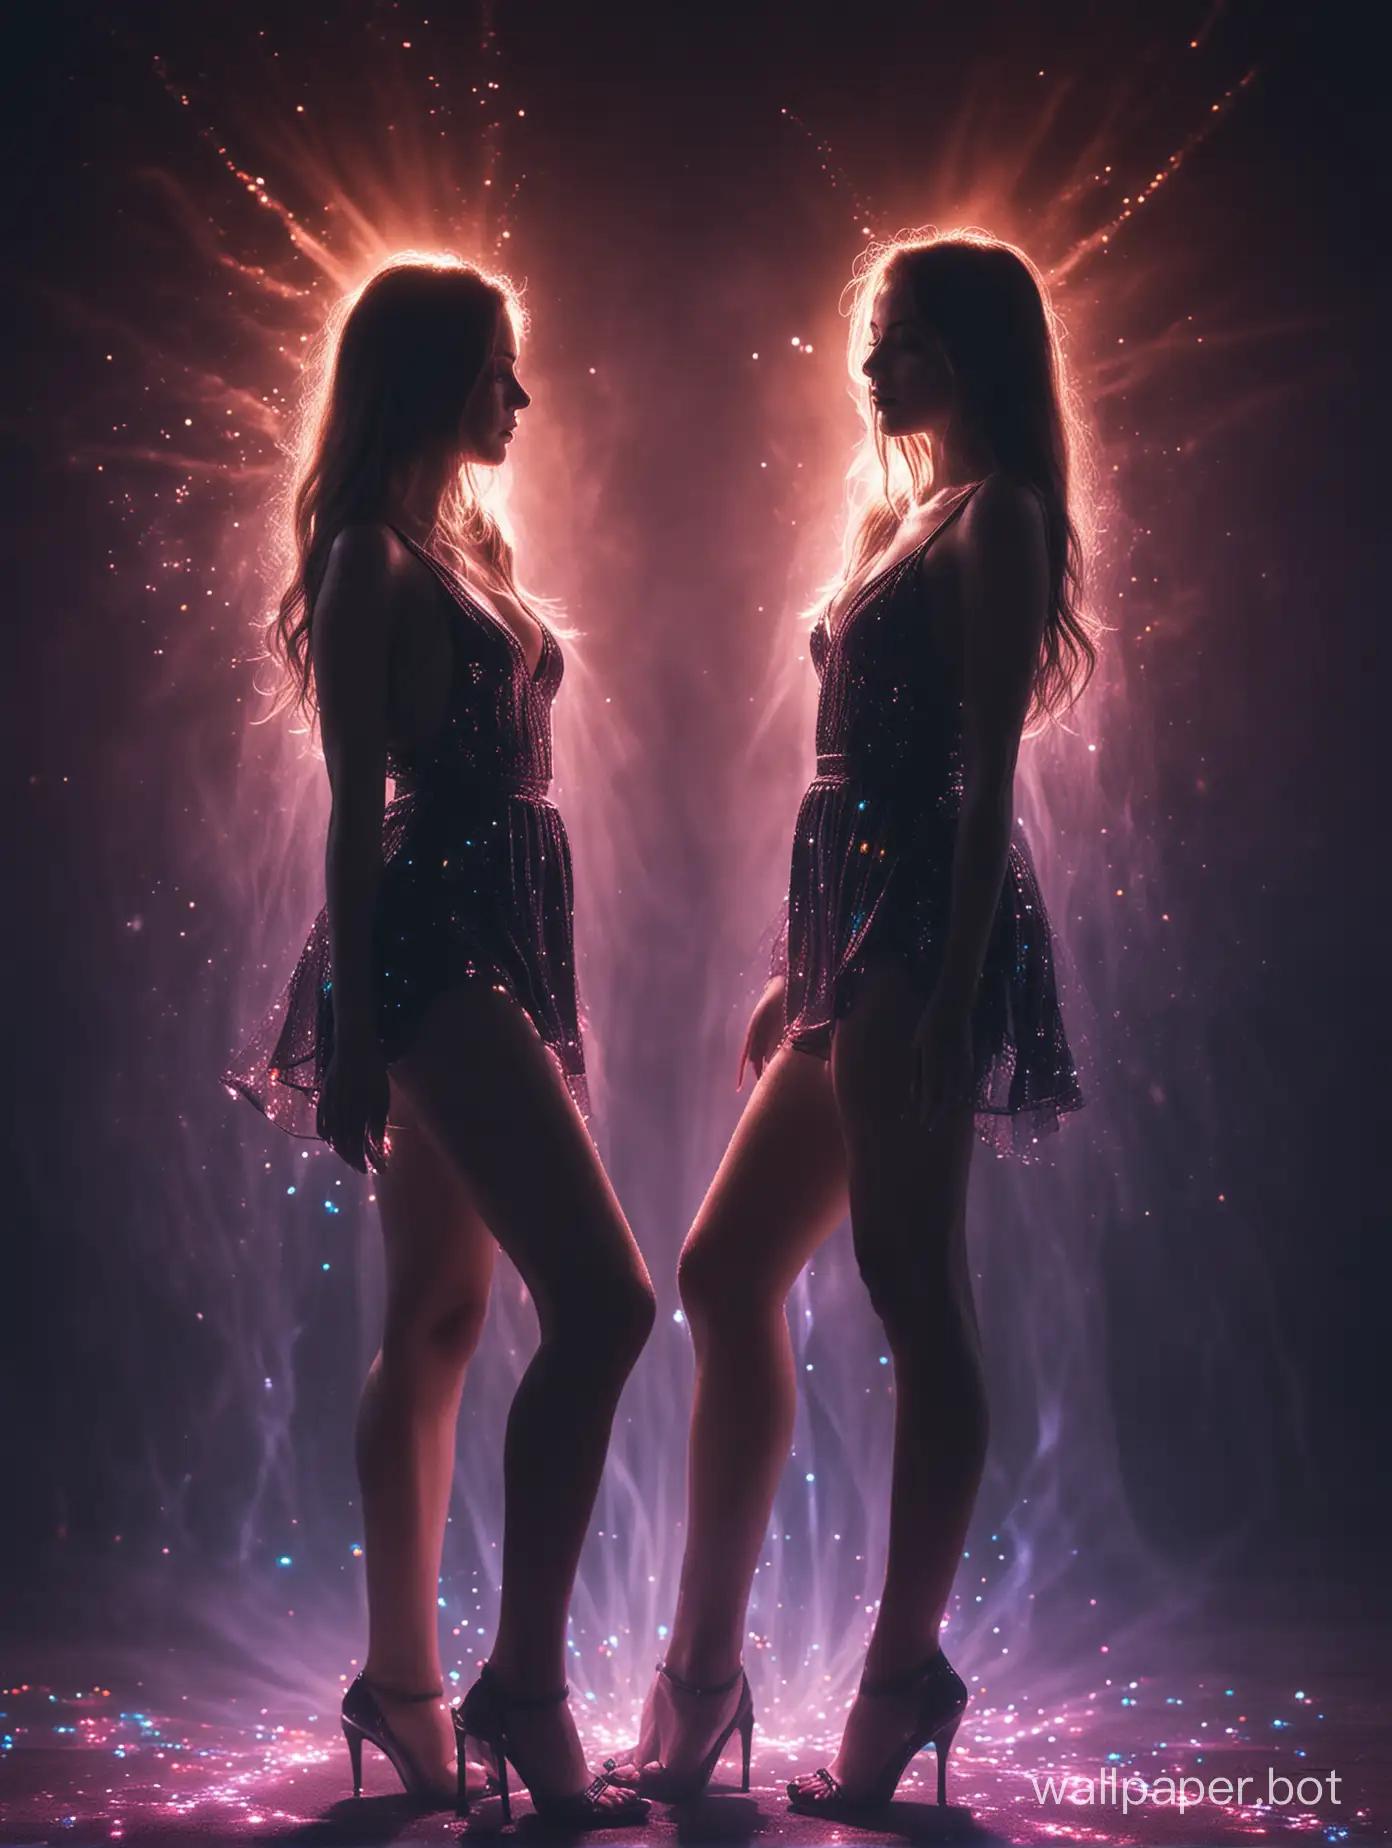 two girls, mystical semi-darkness, bright contrast of colors, magic lights in the air  ass. sexy